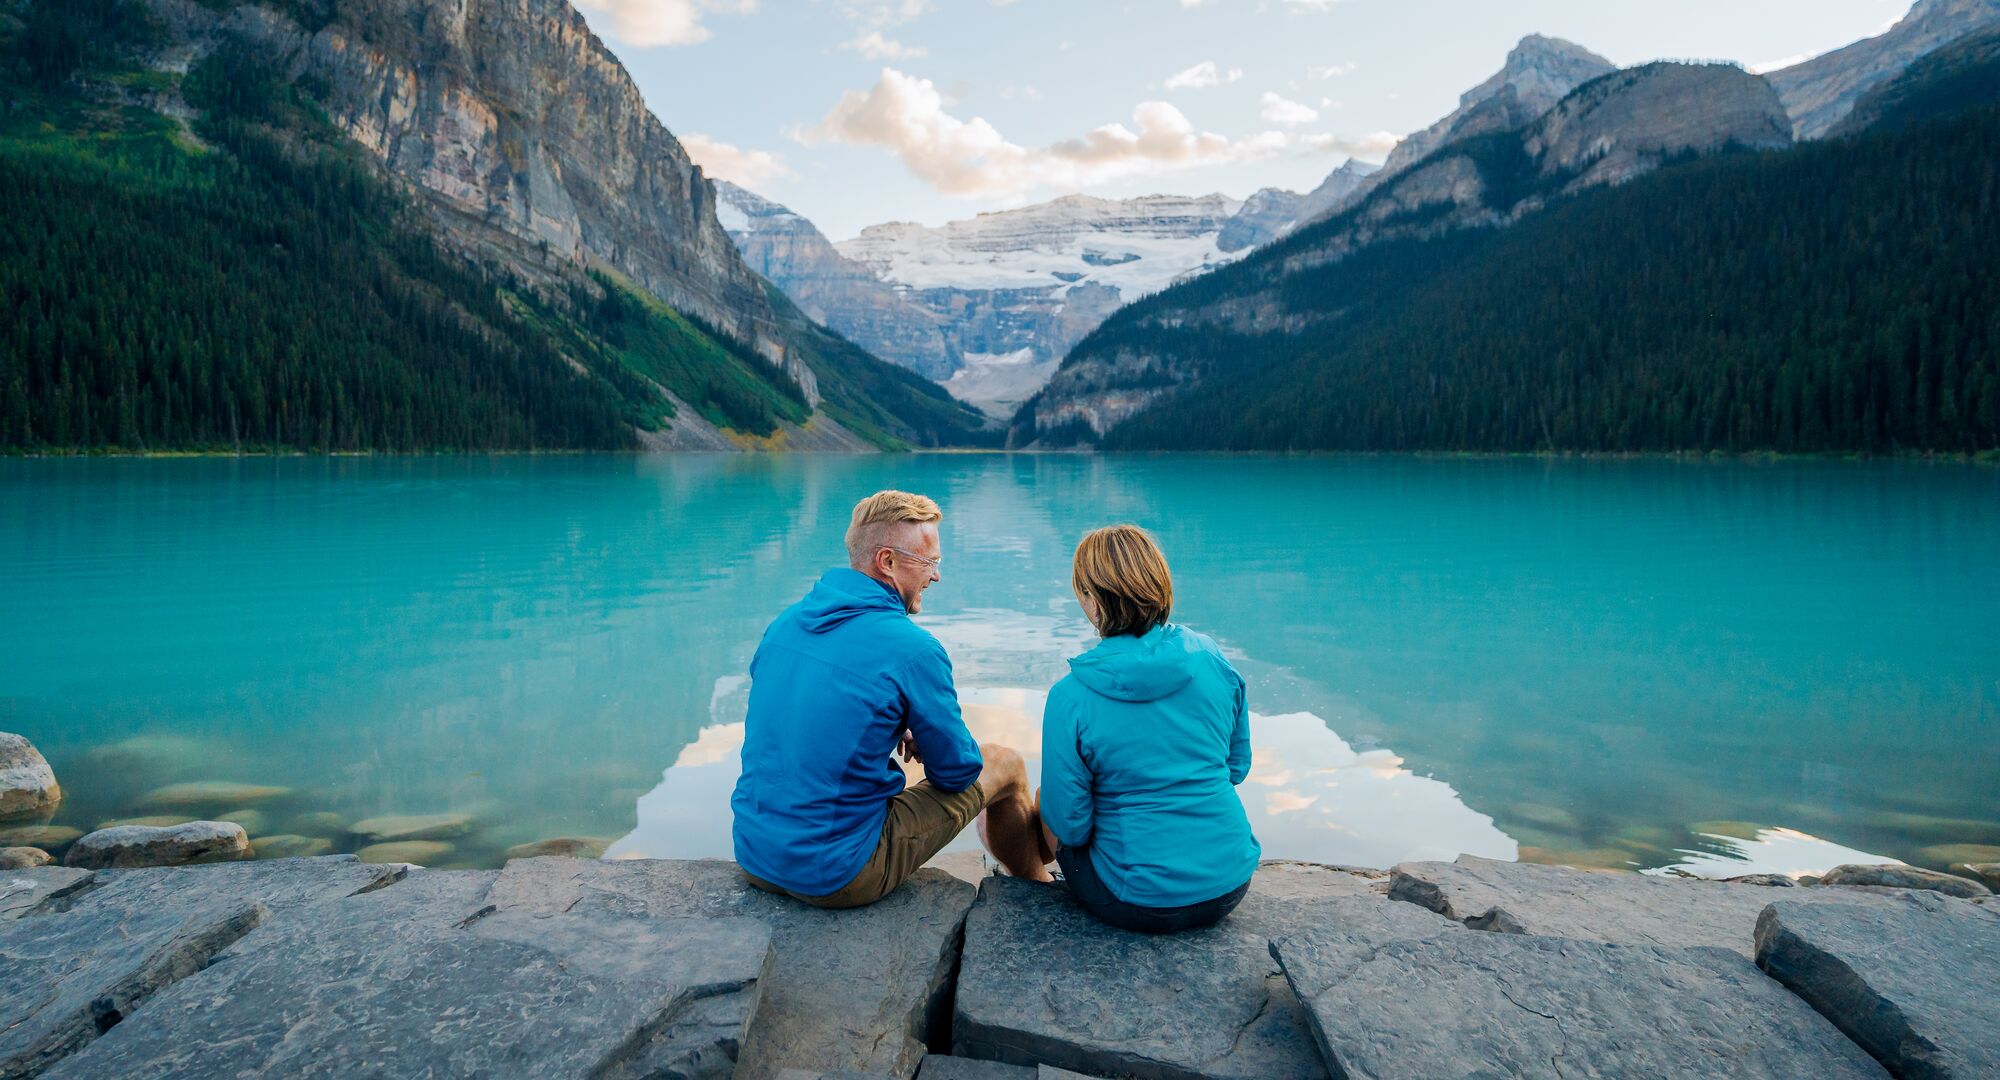 A couple sits on the shore of a turquoise lake staring out at a glacier in the distance while visiting Lake Louise at sunset